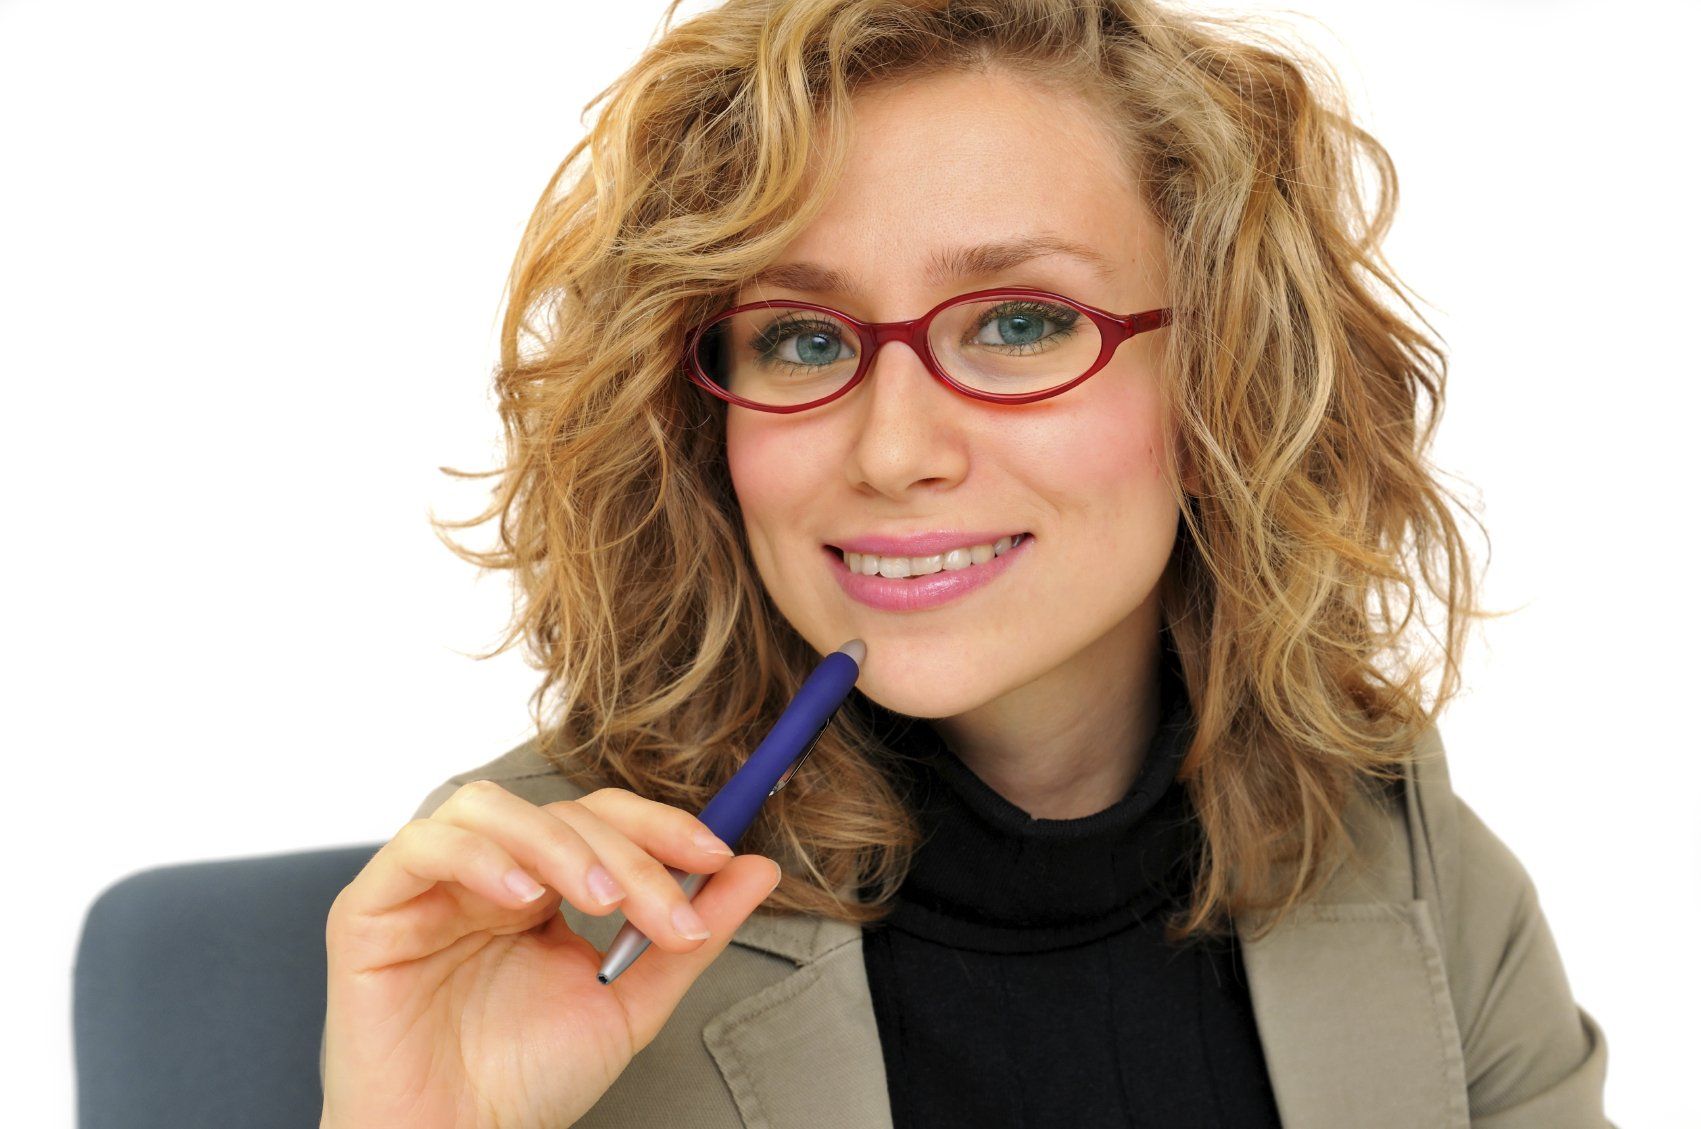 Commit to Lifelong Learning. A lady in a business suit and wearing glasses, holding a blue pen against her chin.